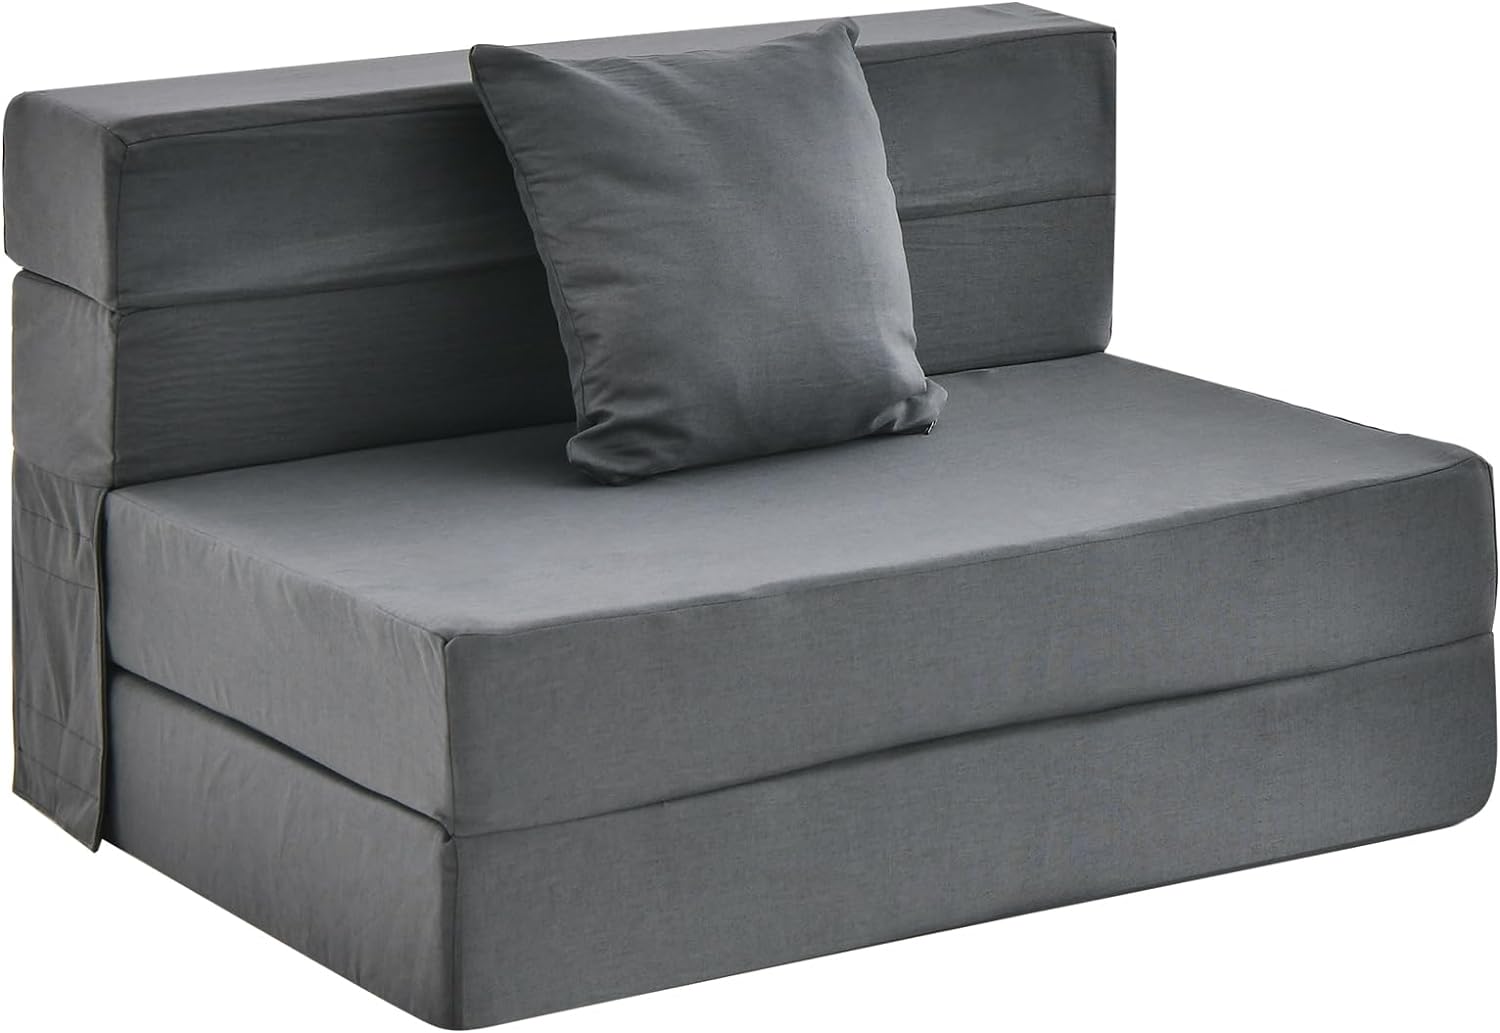 Giantex 6 Inch Folding Sofa Bed Couch with Pillow, Tri-fold Mattress with High-Density Foam, Dark Grey